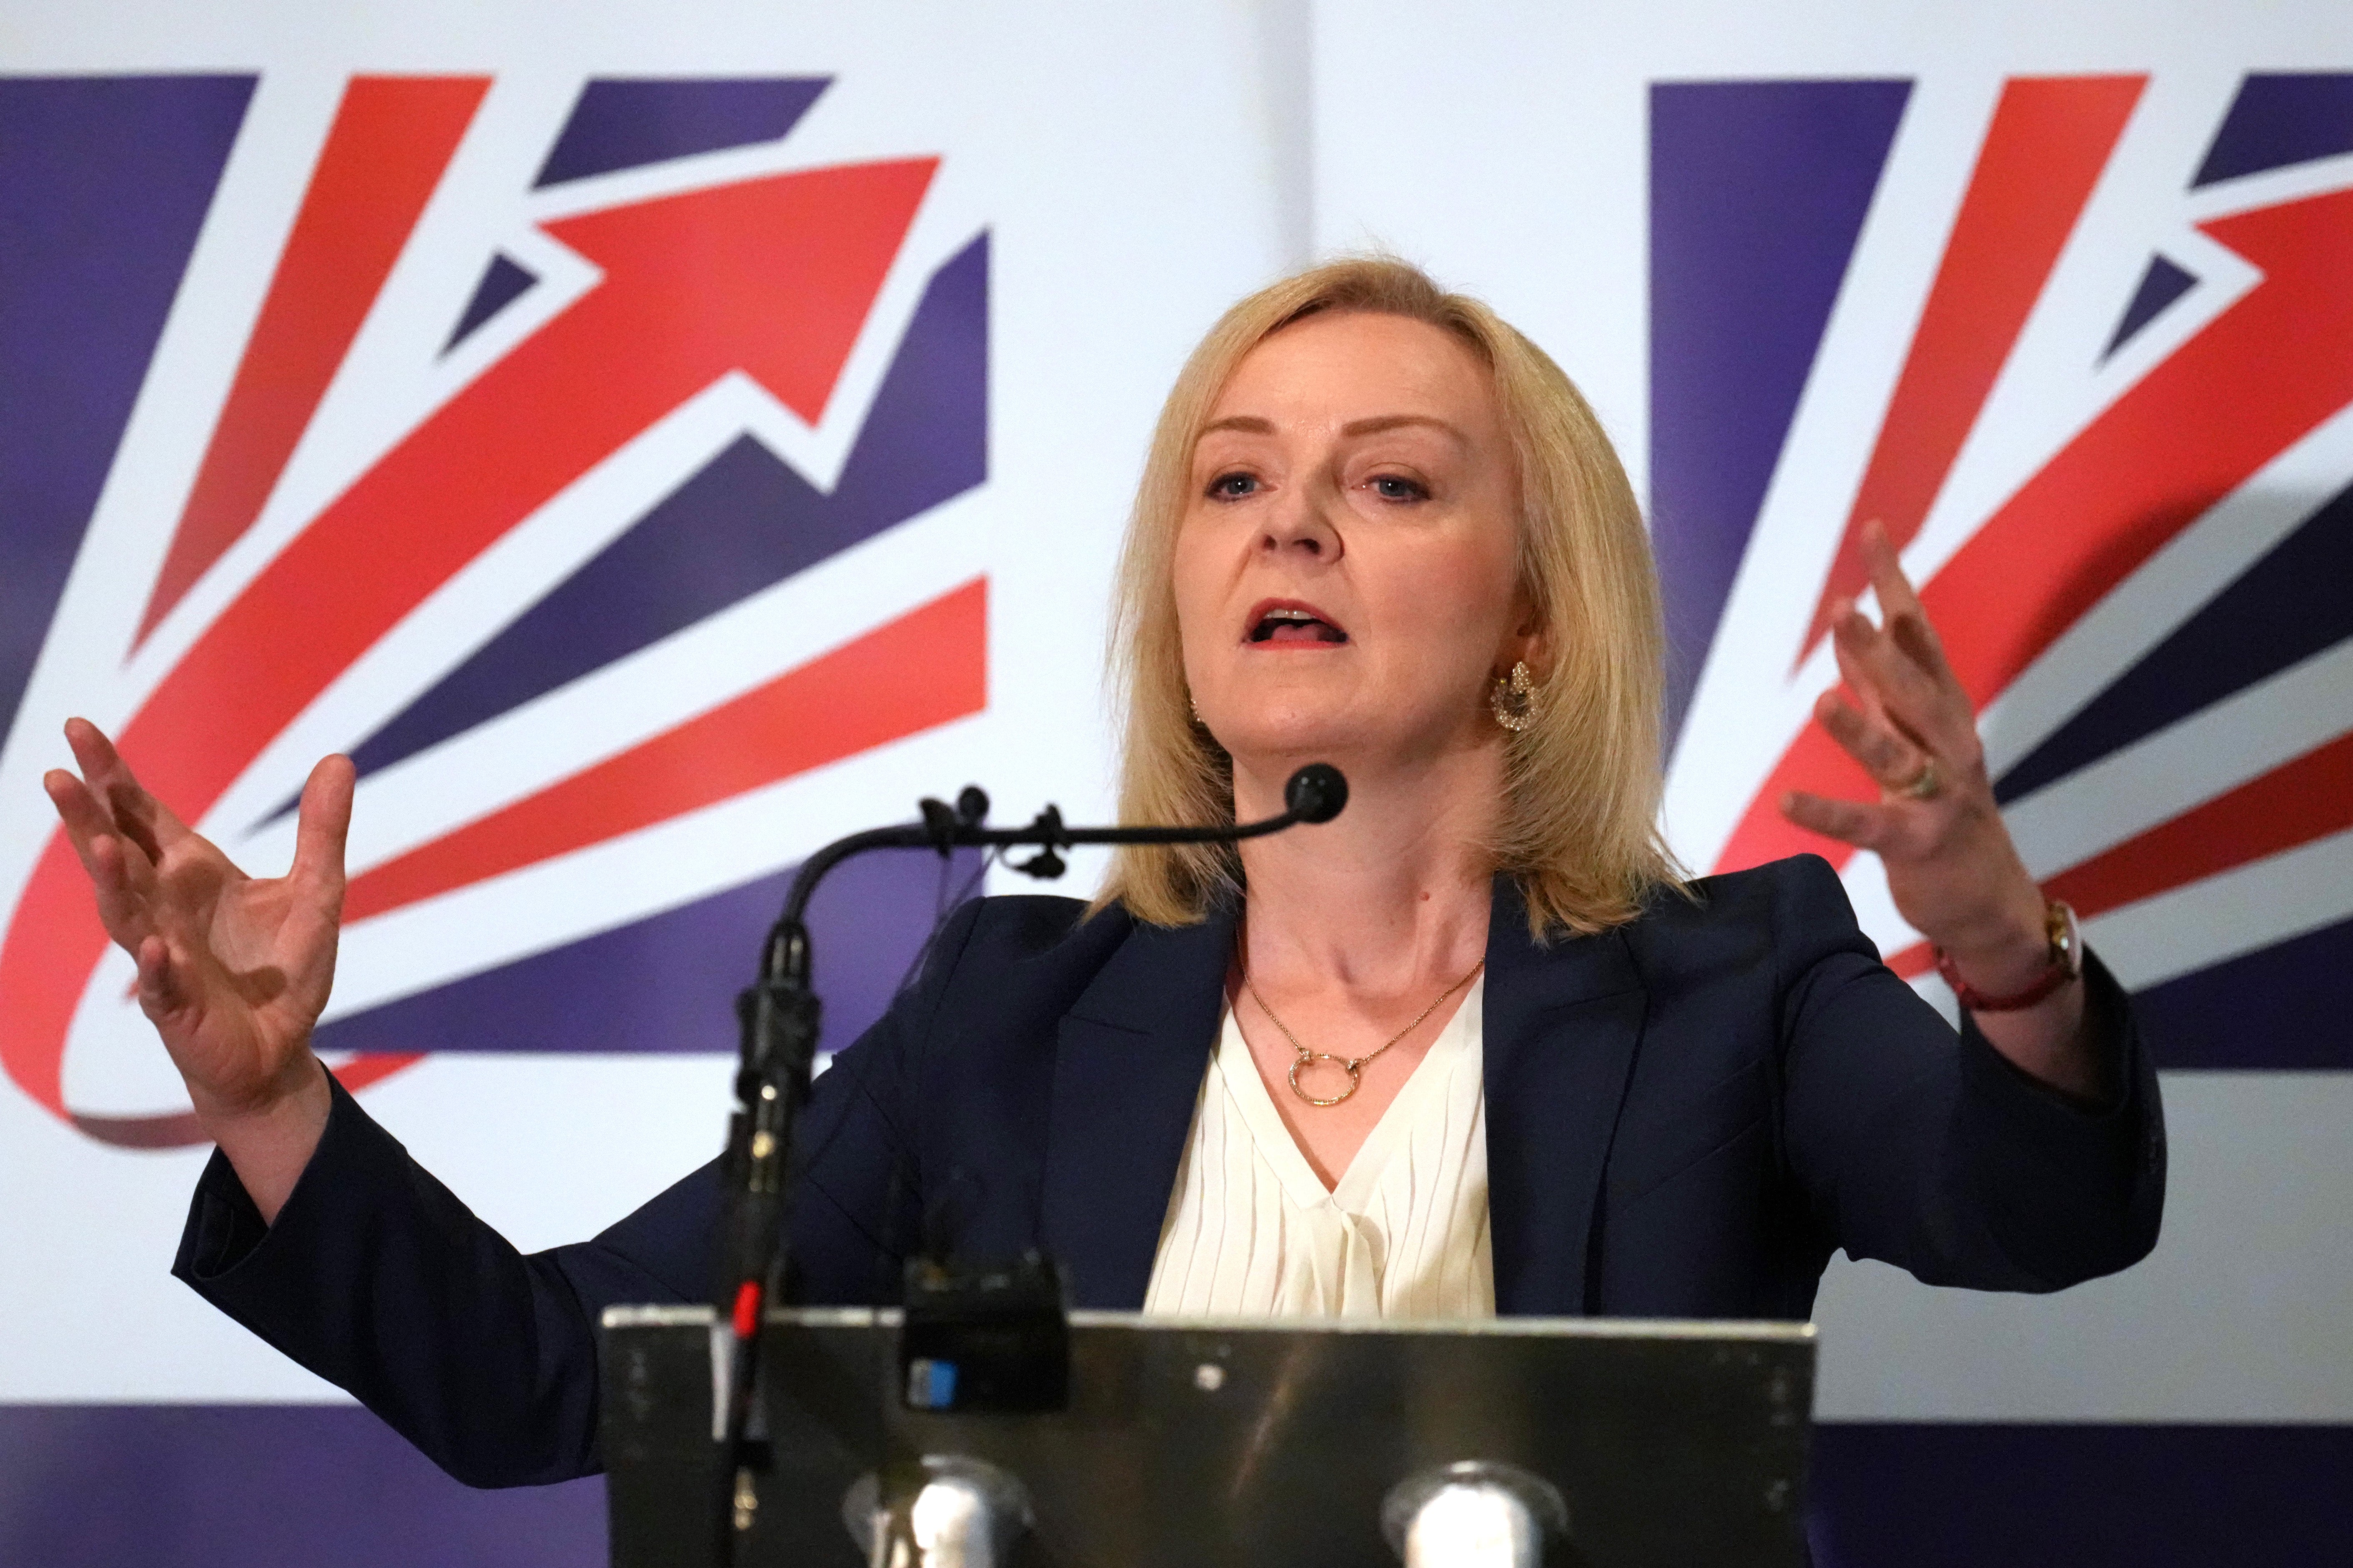 As the prime minister calls for unity, up pops the lady he ousted, Liz Truss, this time launching ‘popular conservatism’